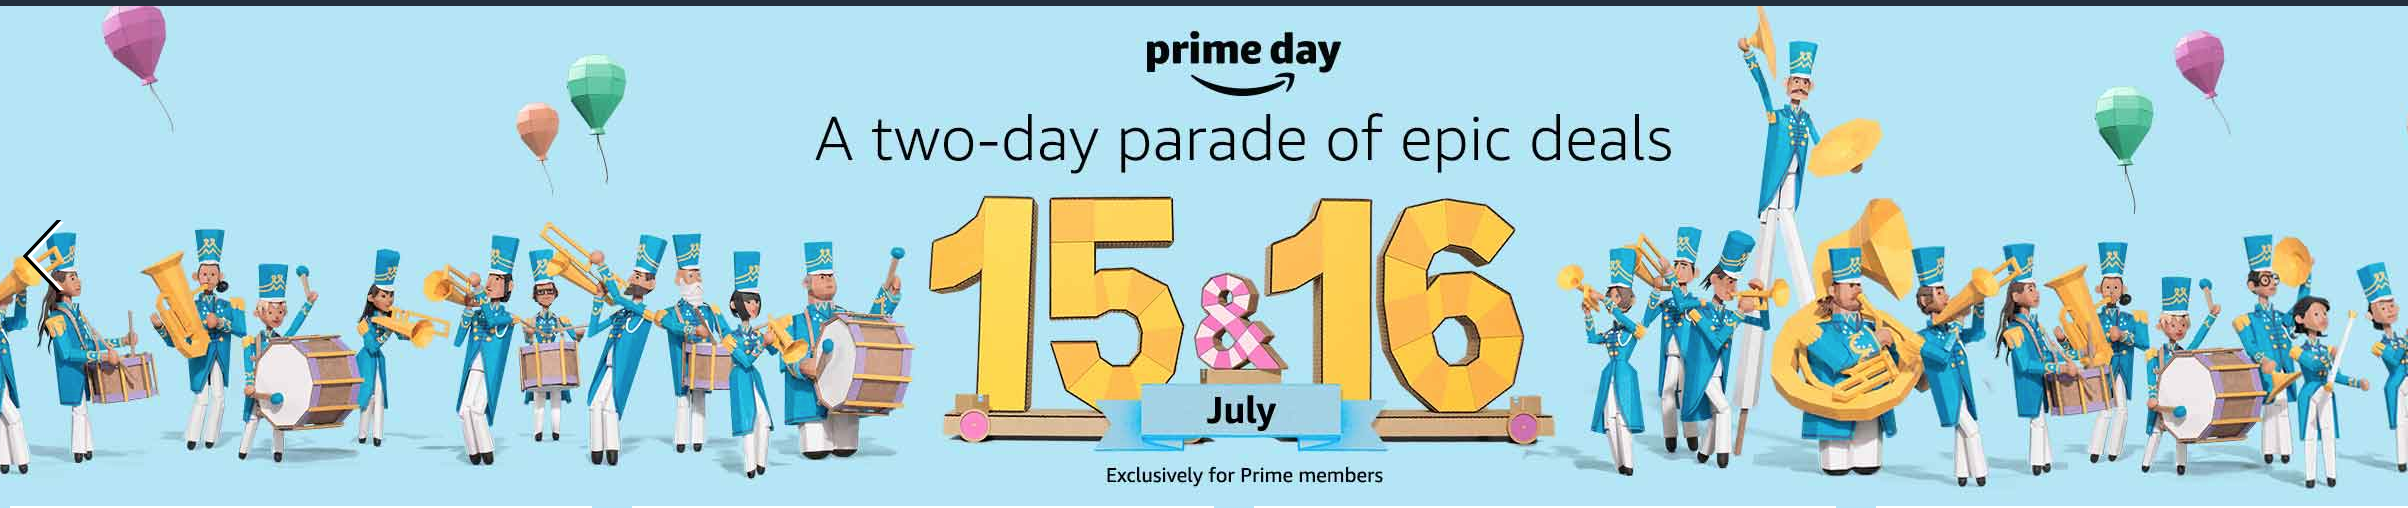 Amazon Prime Day 2019: Huge Discount for Prime Members at Amazon